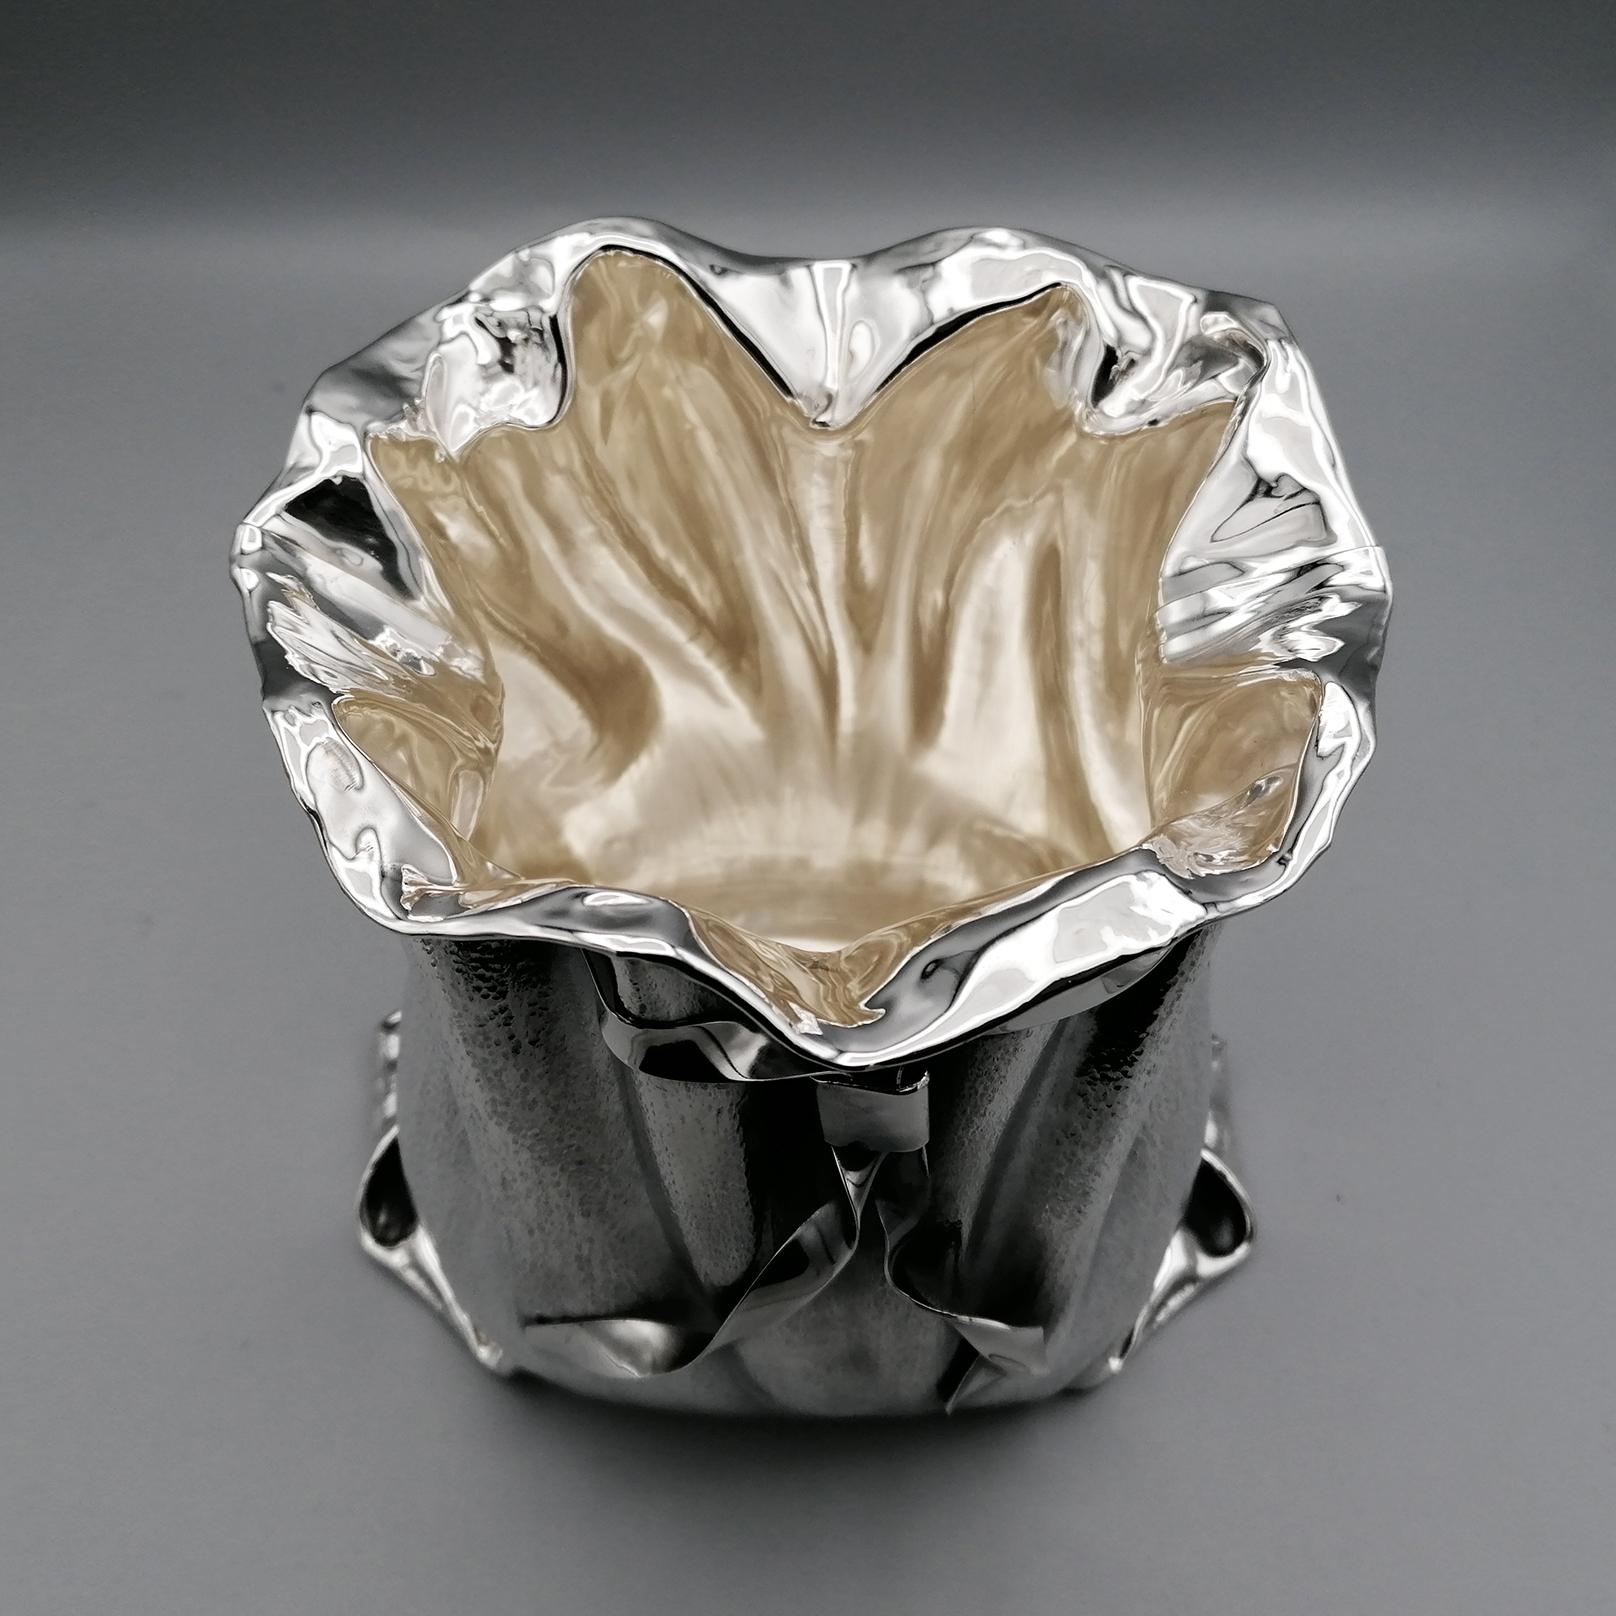 21th Century Italian Sterling Silver decorative Vase or Bowl For Sale 4